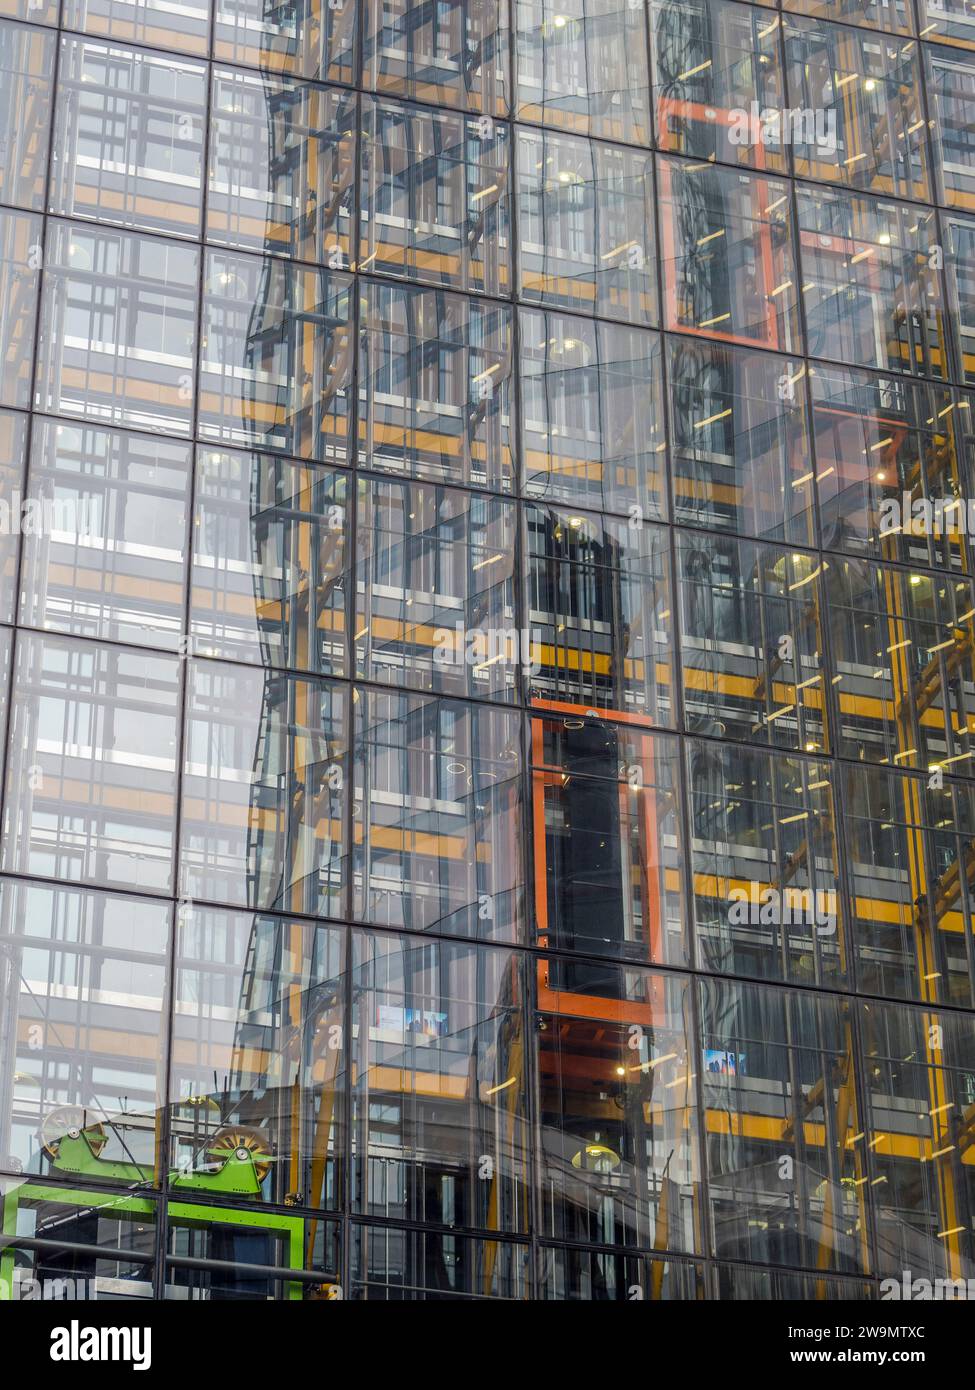 The Leadenhall Building, Glass and Lifts, City of London, London, England, GROSSBRITANNIEN, GB. Stockfoto